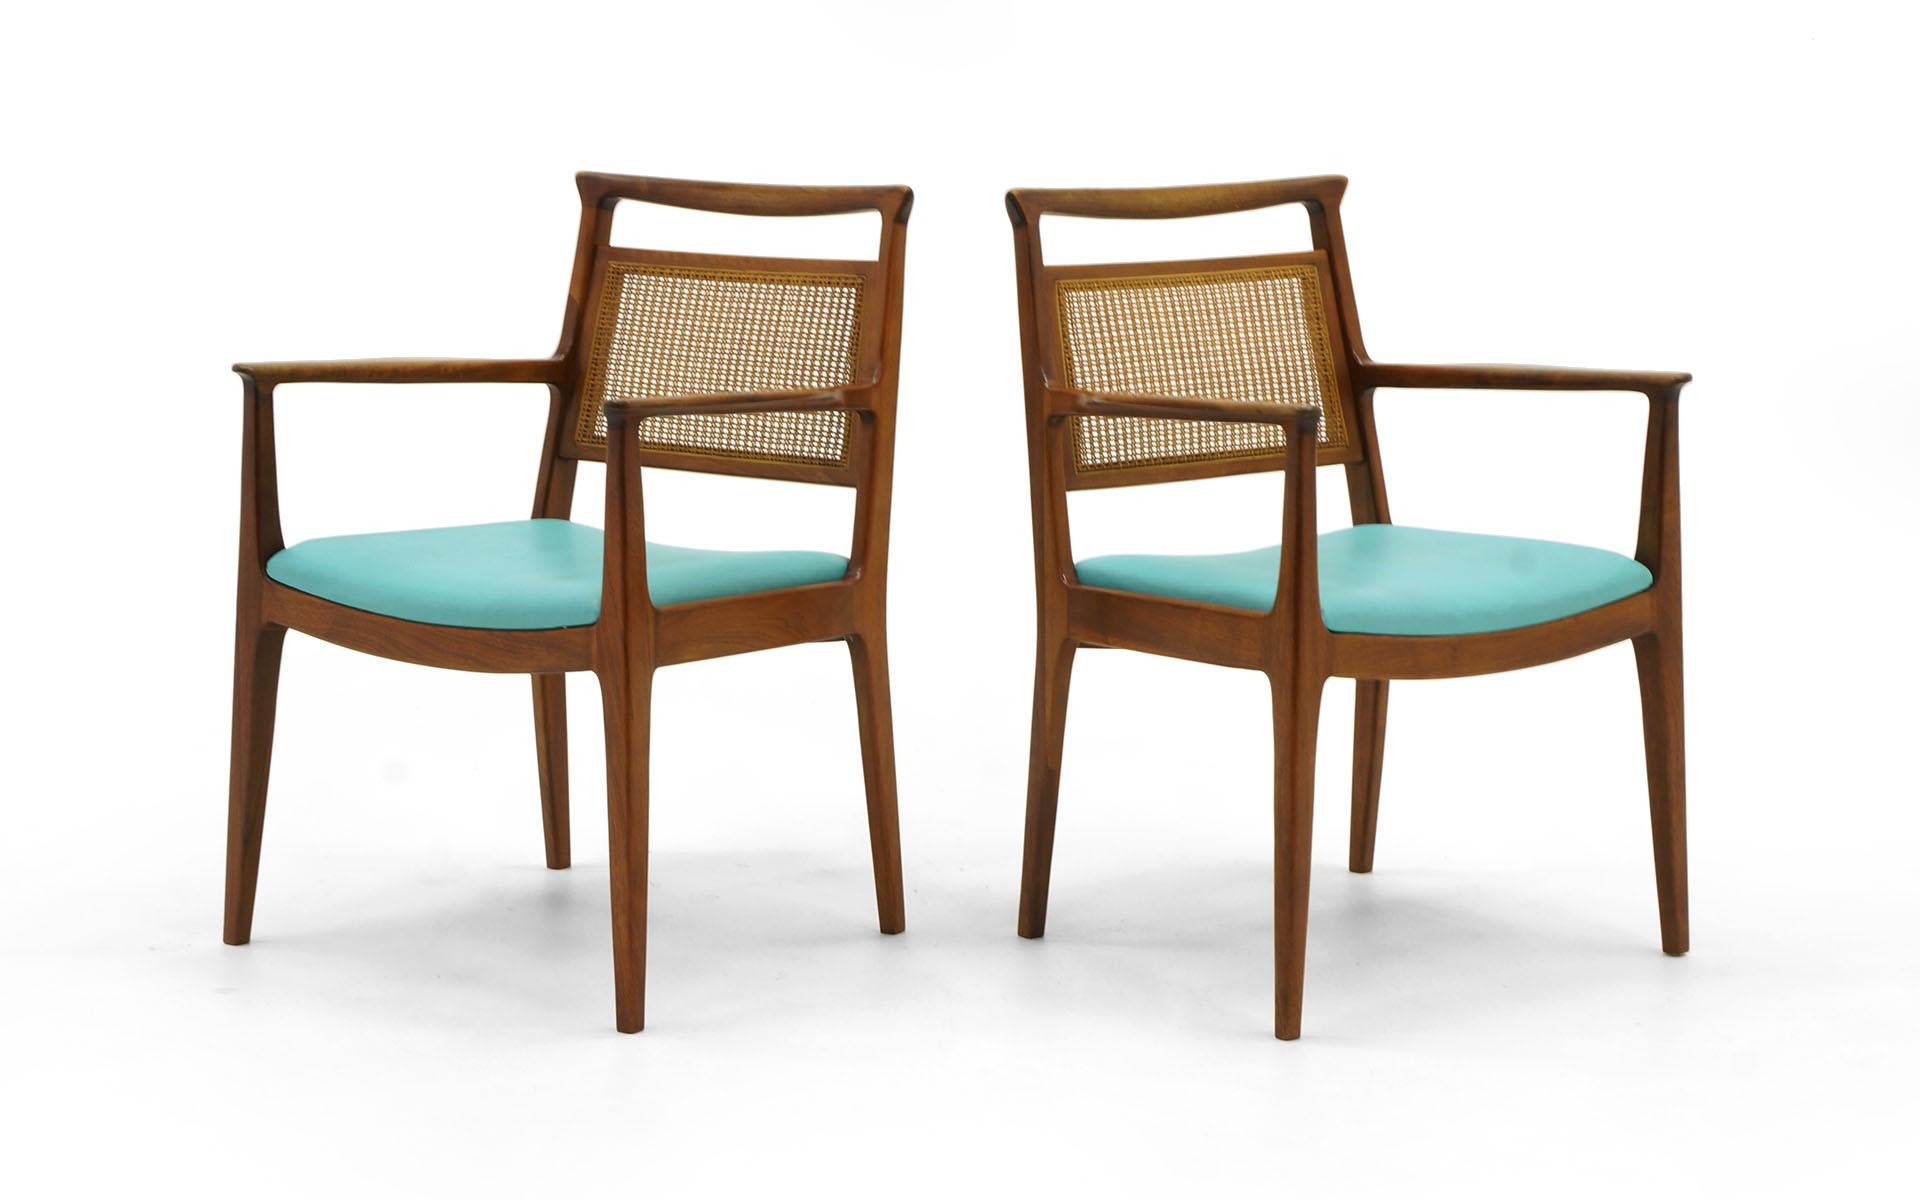 Set of six dining chairs designed by Edward Wormley for Dunbar. Two armchairs and four side chairs. Original solid walnut frames and cane backs are in excellent condition. The seats have apparently been reupholstered in light blue vinyl some years